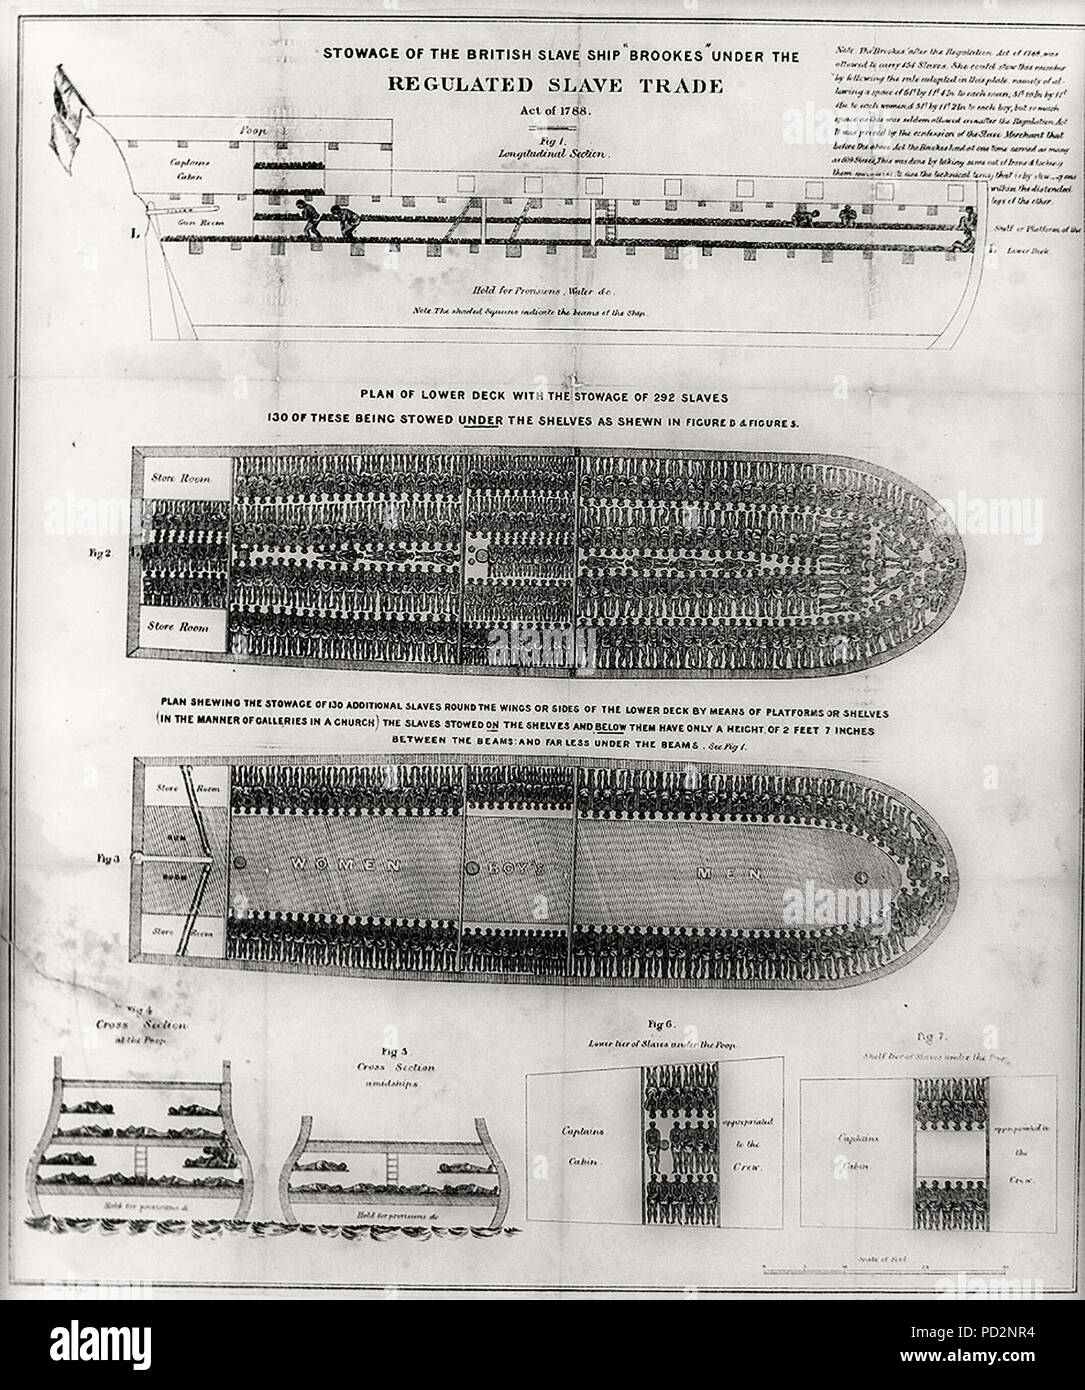 Stowage of the British slave ship Brookes under the regulated slave trade act of 1788 - Illustration showing deck plans and cross sections of British slave ship Brookes. Stock Photo